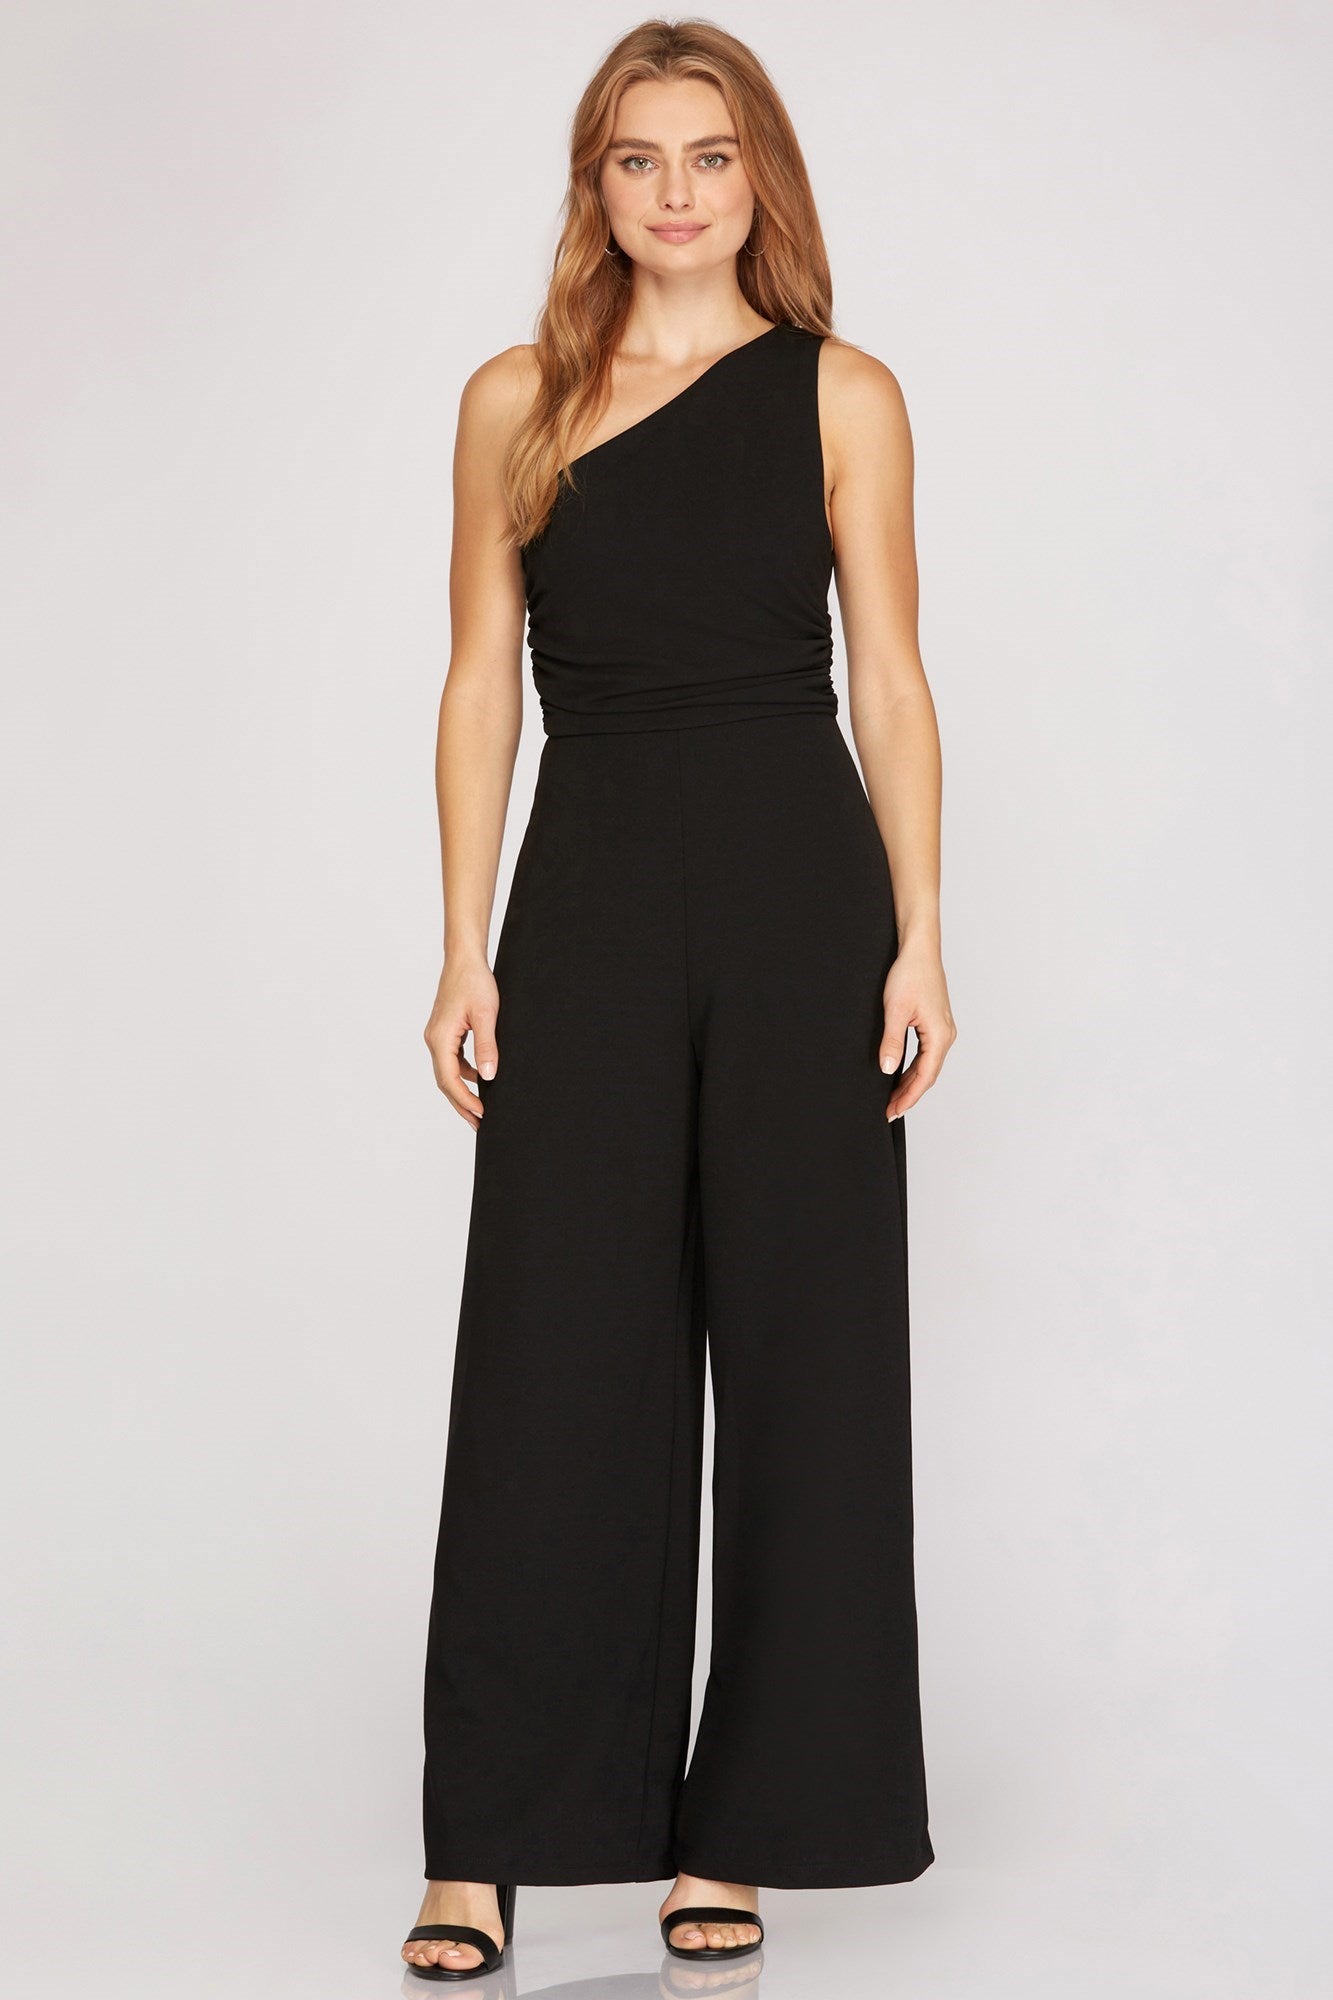 SHE AND SKY Women's Jumpsuit Sleeveless One Shoulder Heavy Knit Pleated Jumpsuit || David's Clothing